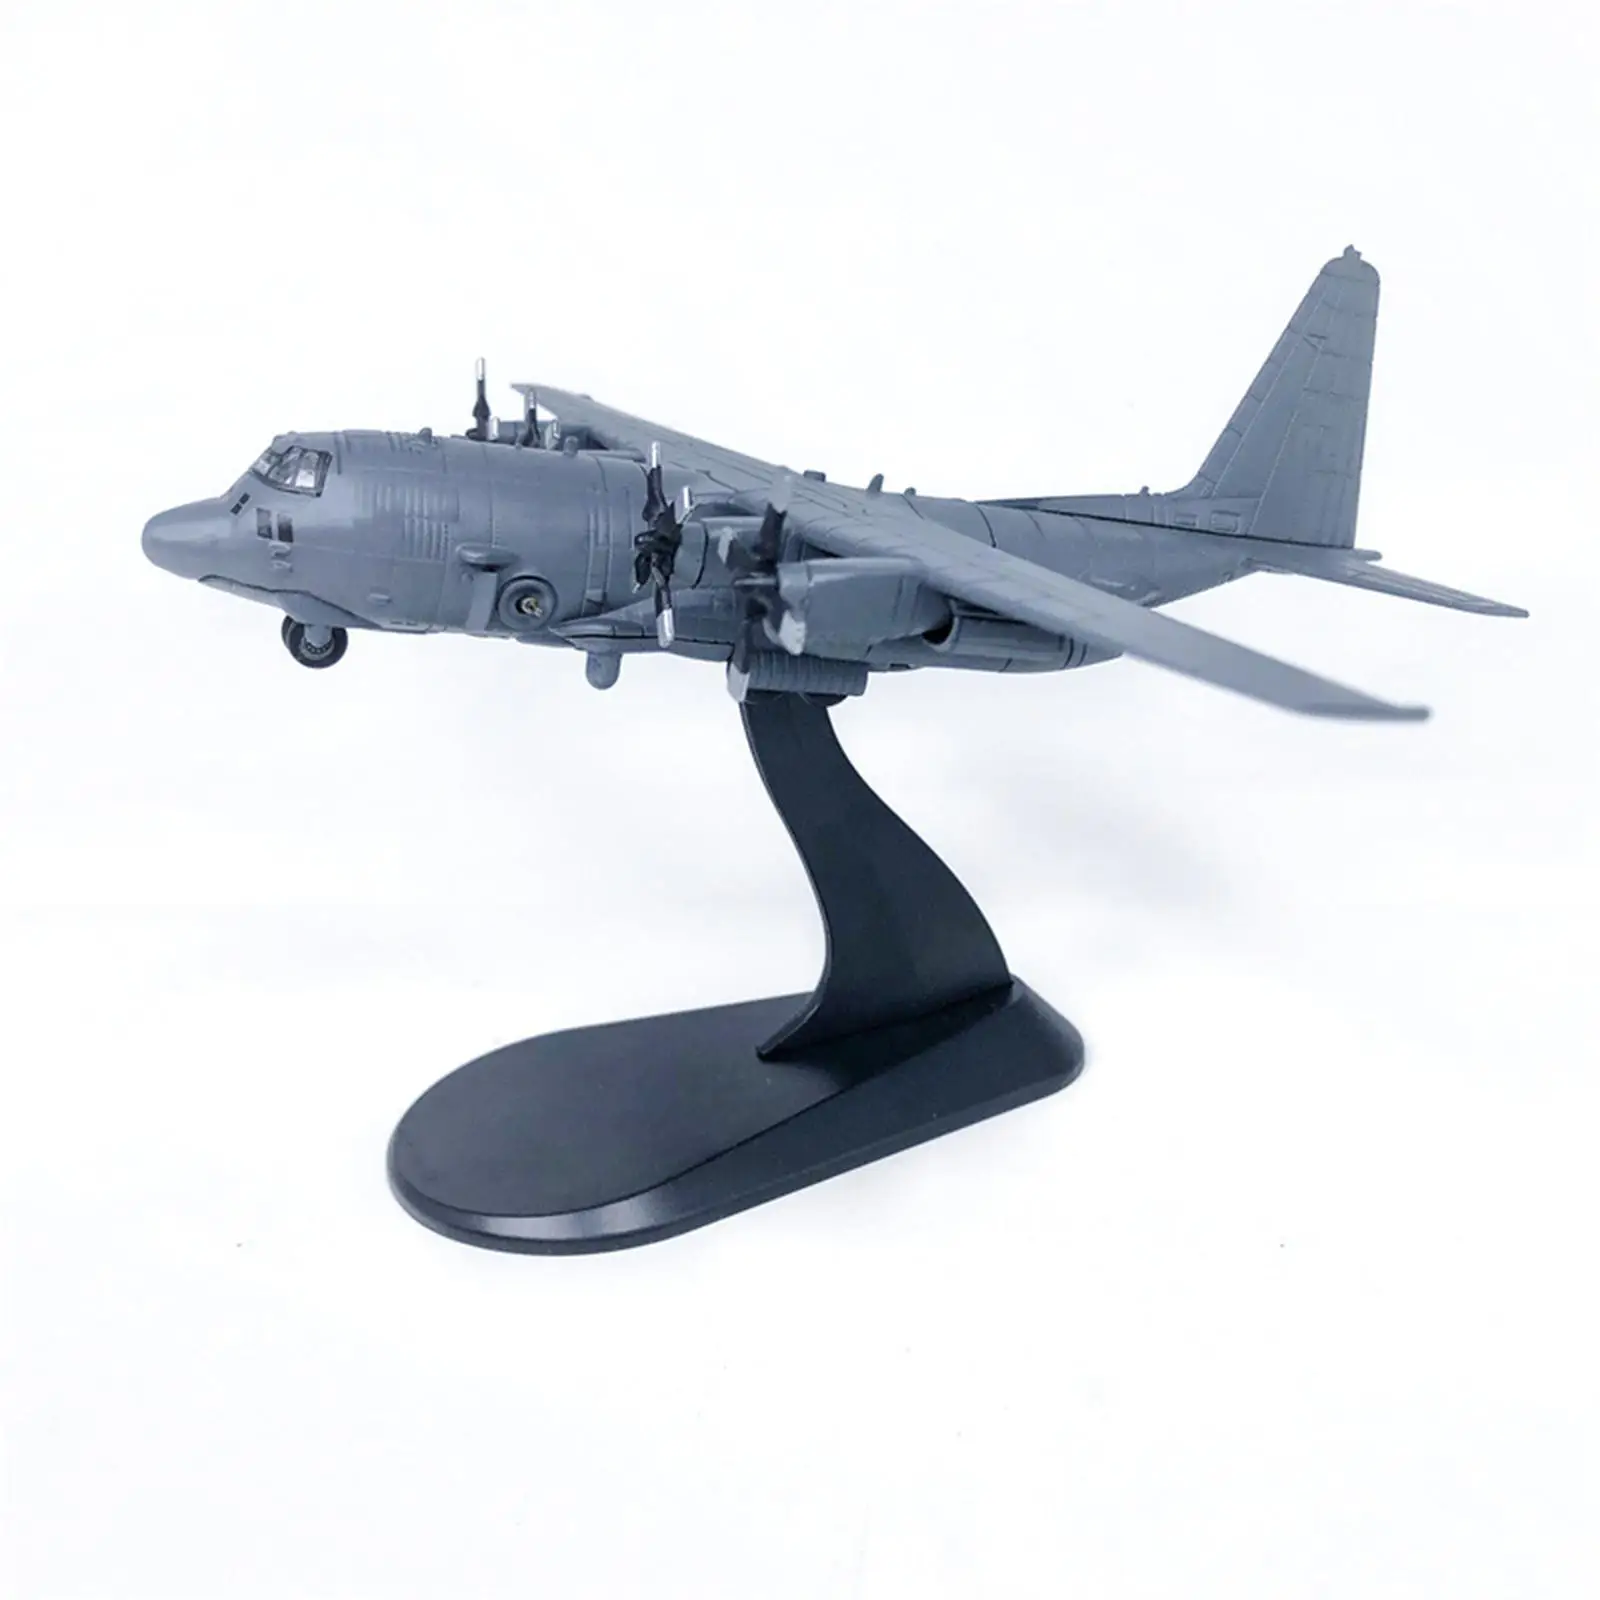 1/200 Scale Simulation Model Collectible Alloy Party Favors Gifts Durable Die-Cast Aircraft for Tabletop